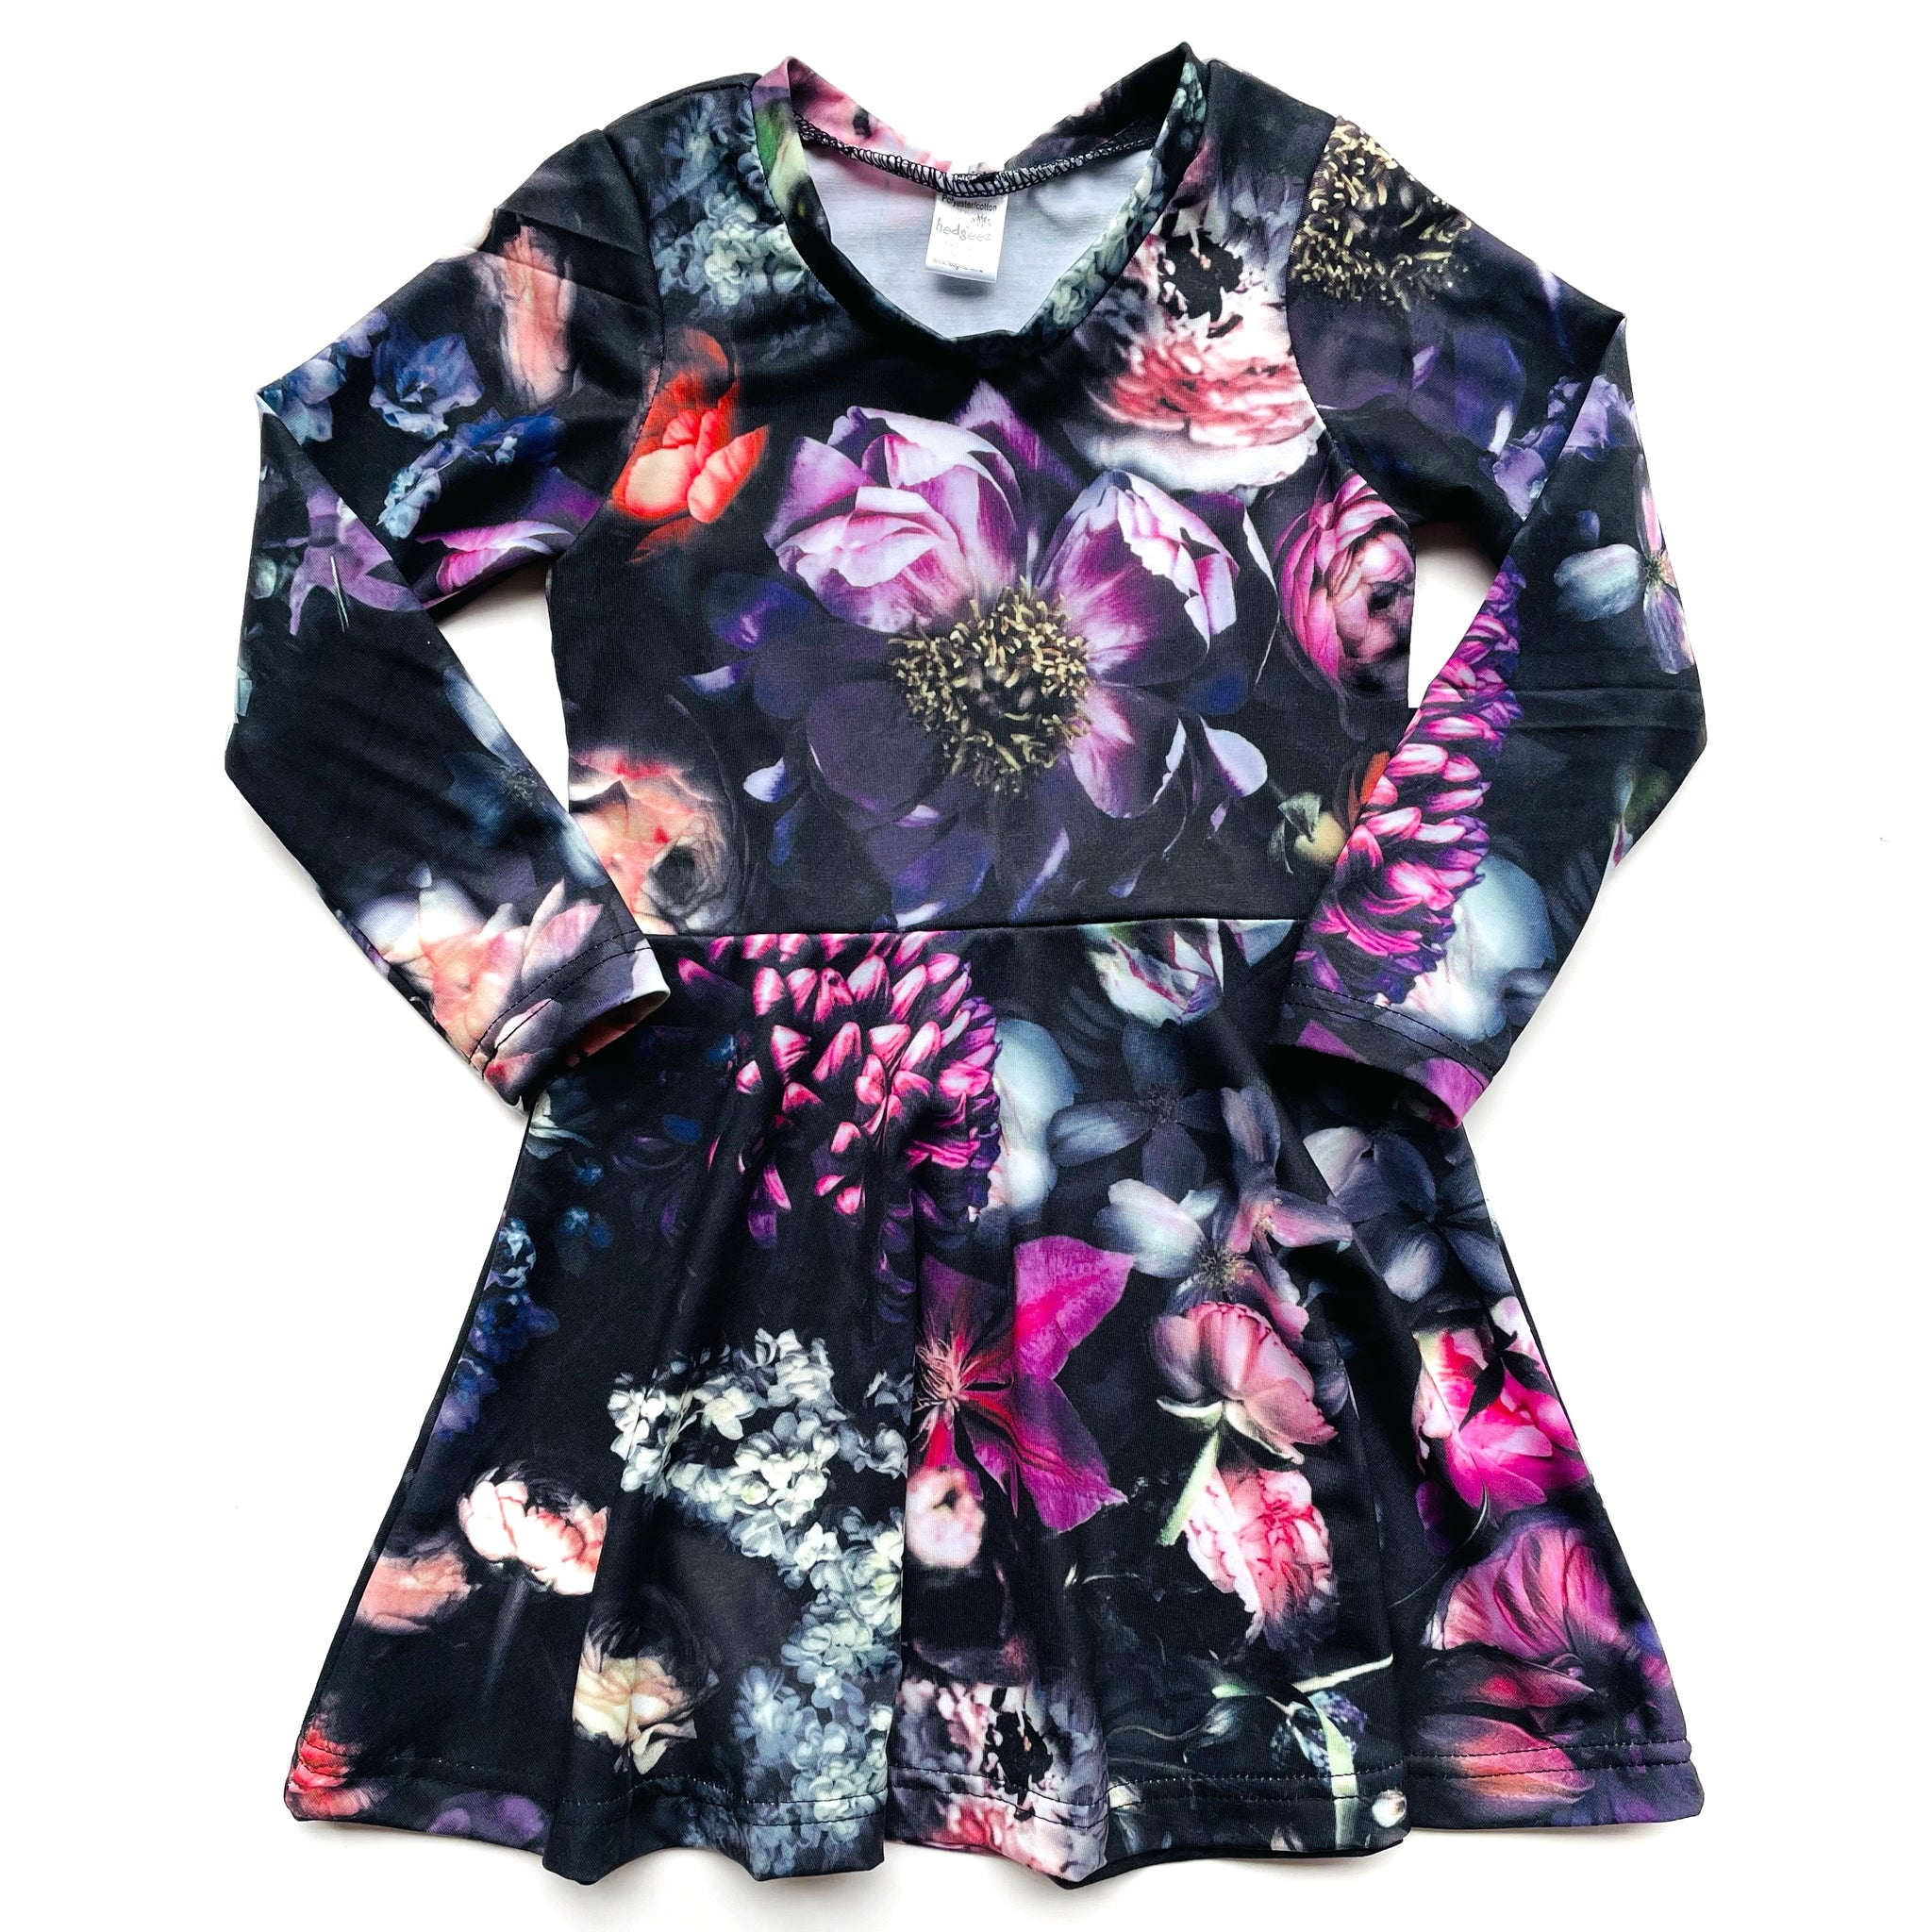 Twirl Dress Black Floral - Long/Short Sleeve - Size 3,4,5 and 8